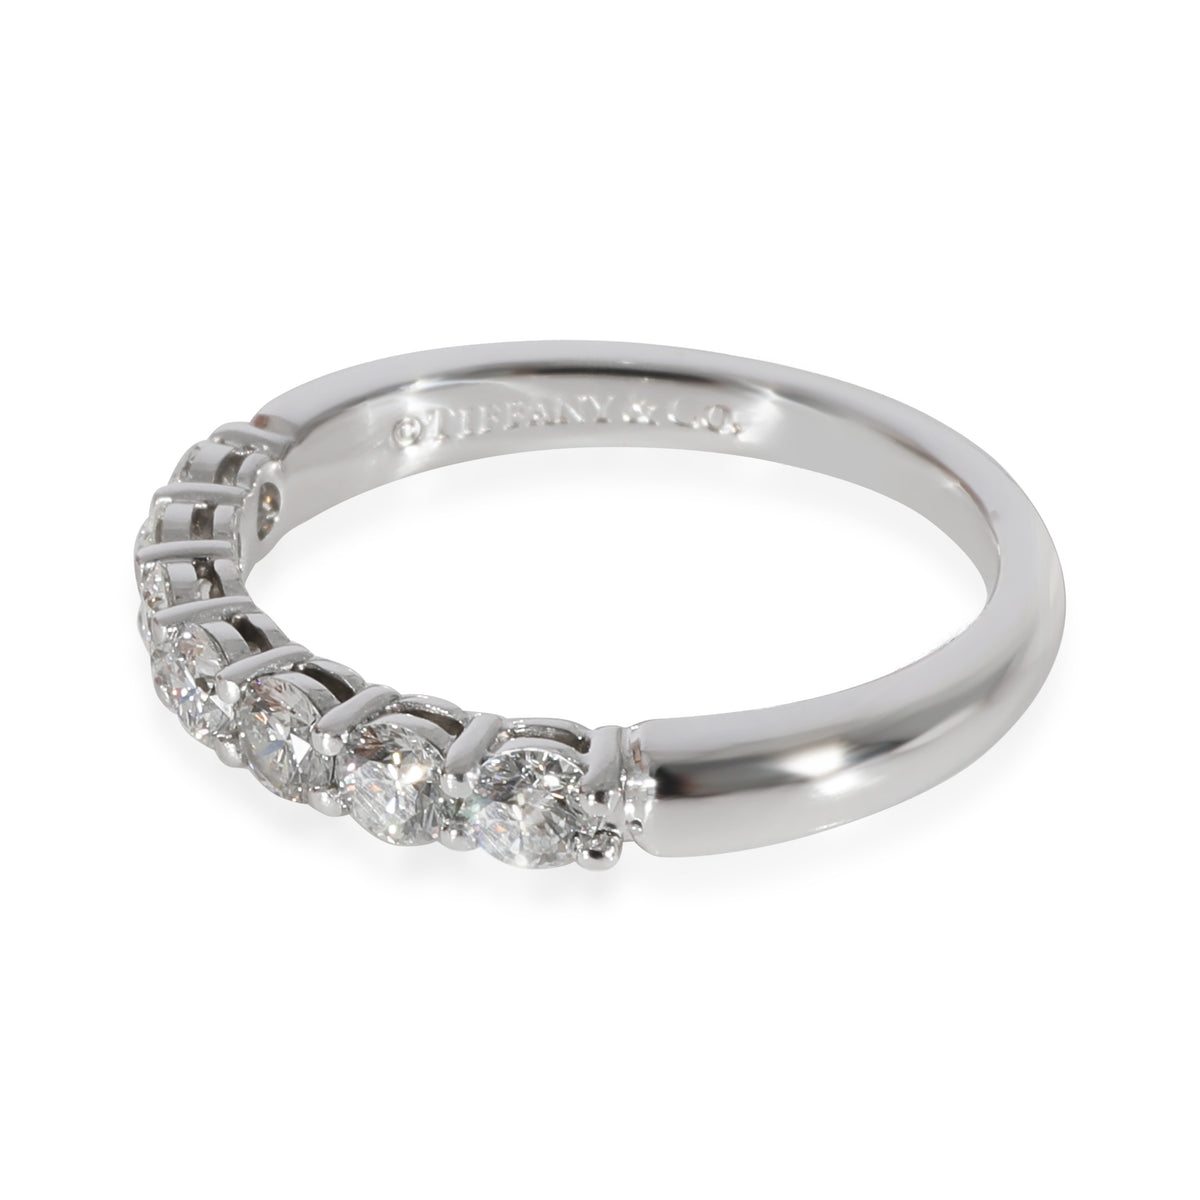 Tiffany & Co. Forever Diamond 7 Stone Band in Platinum 0.56 CTW